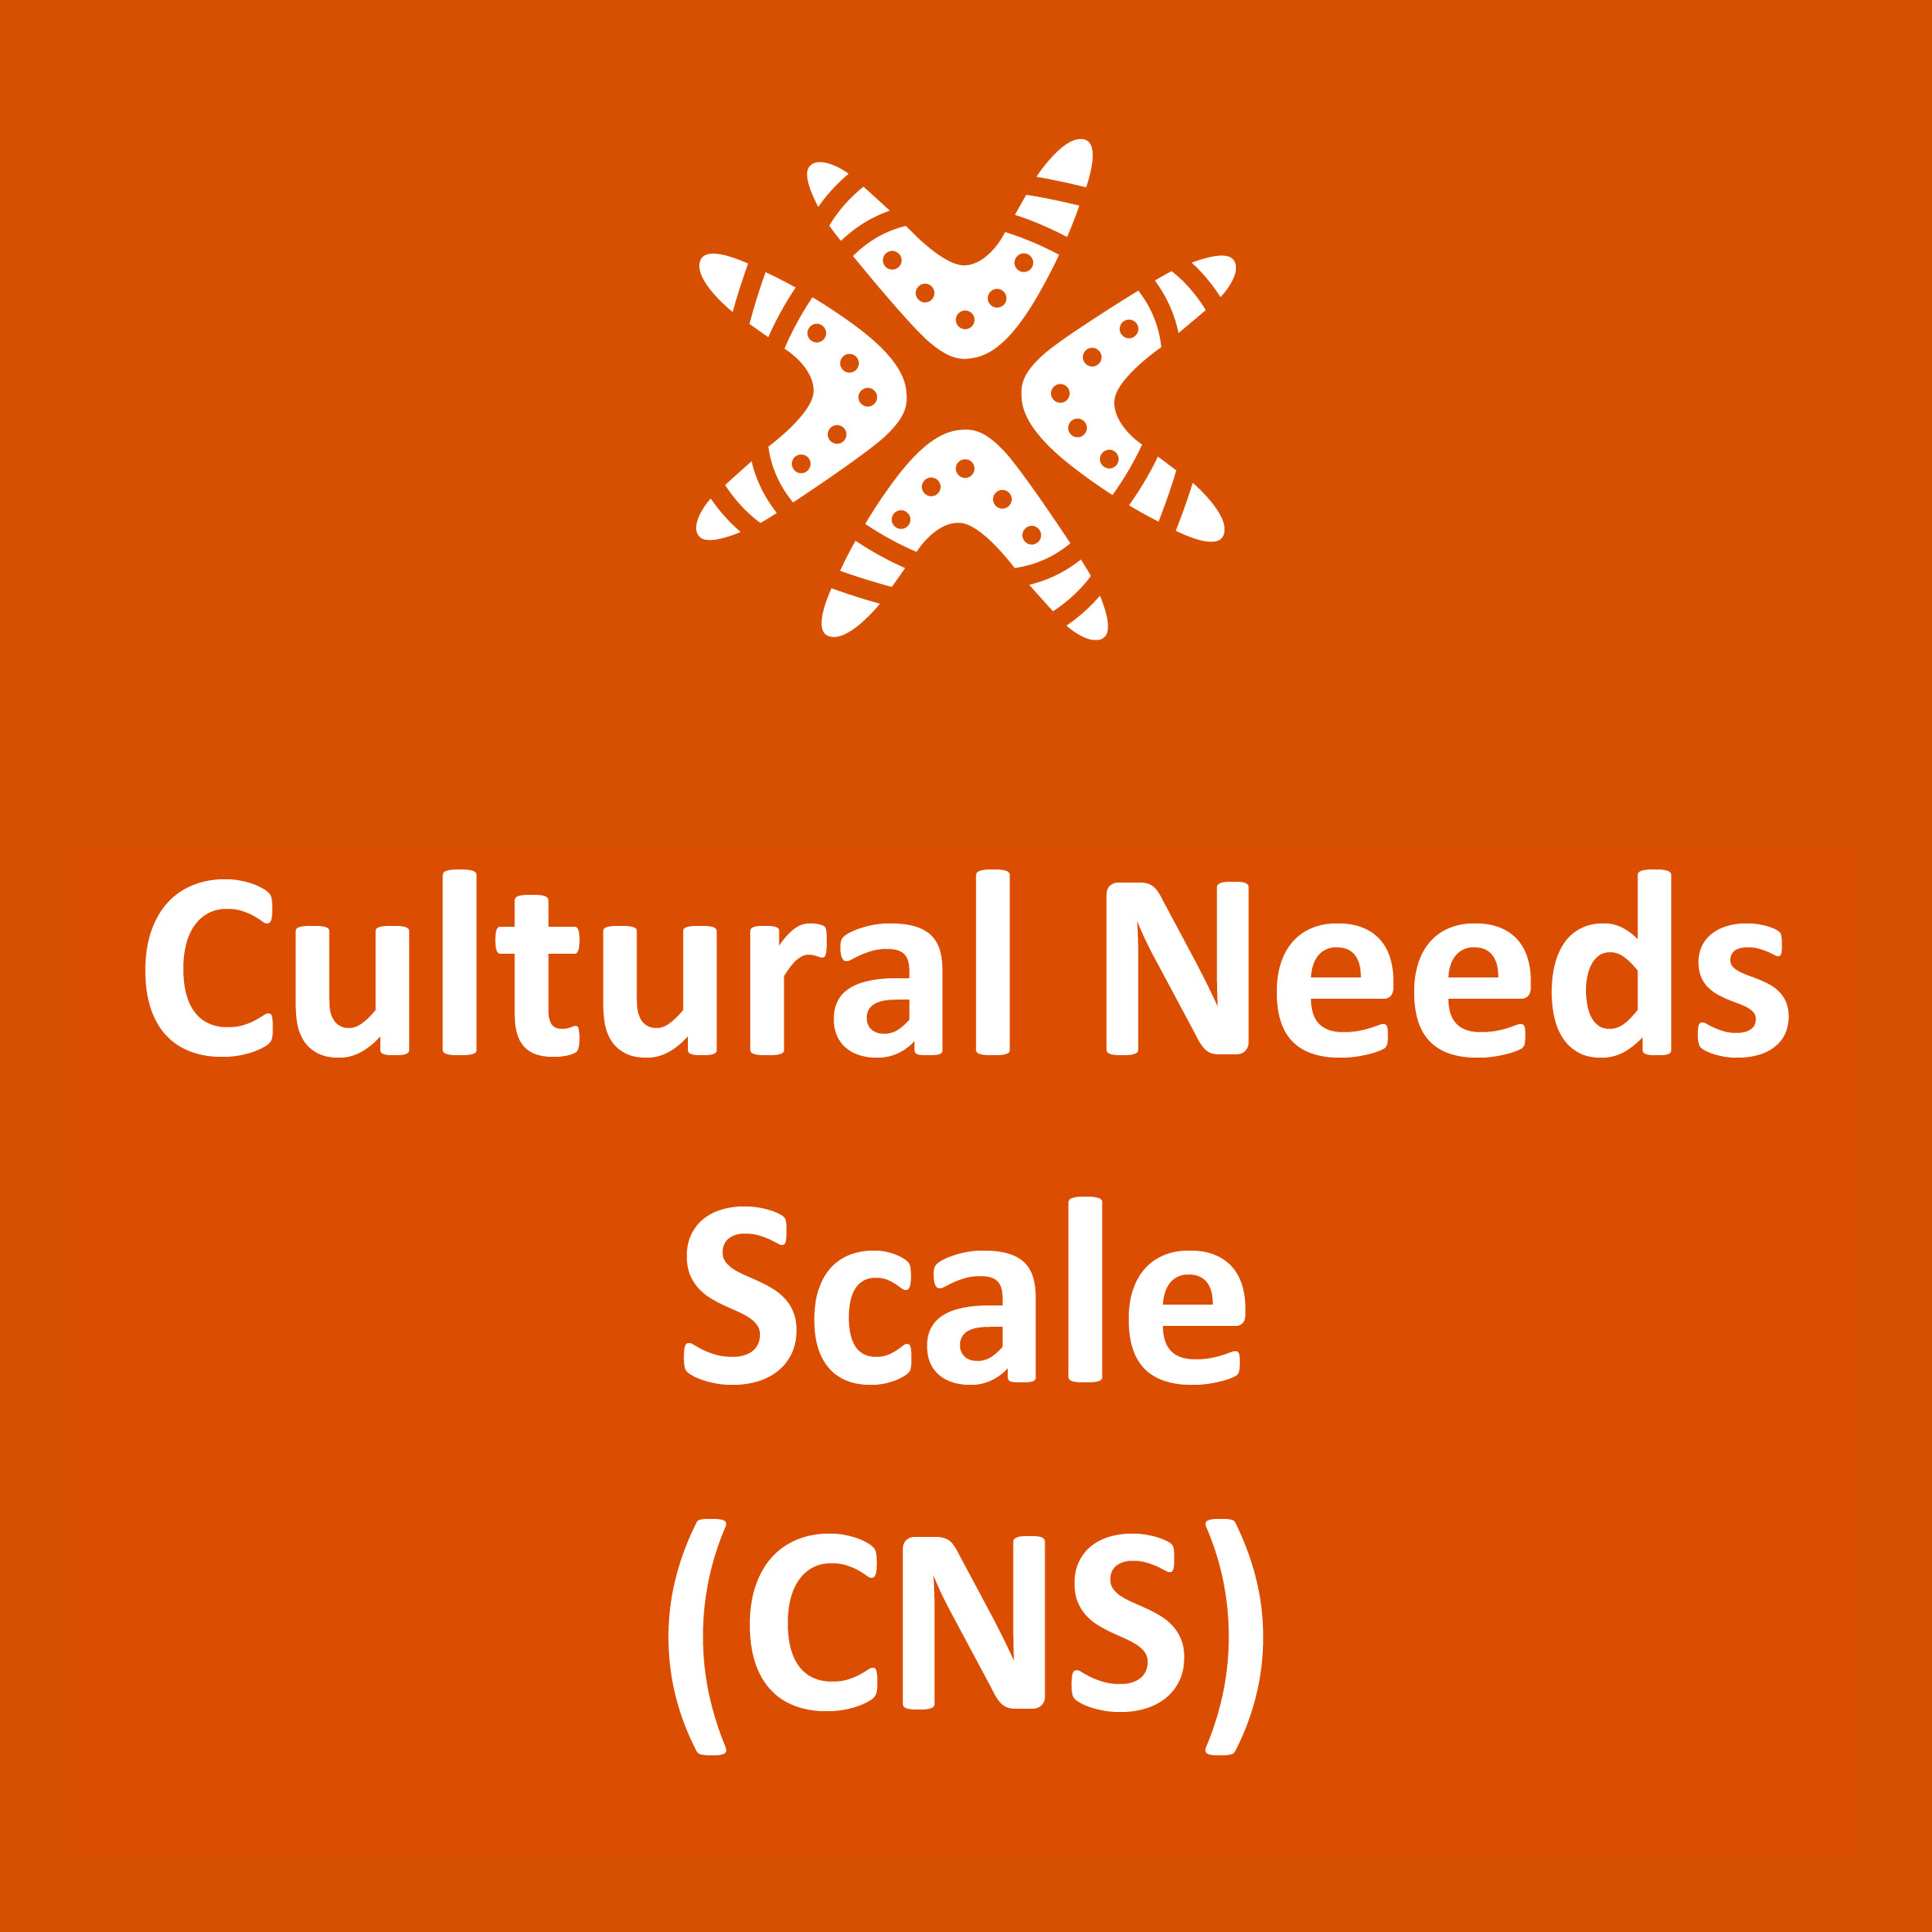 The Cultural Needs Scale (CNS) for Aboriginal Australians